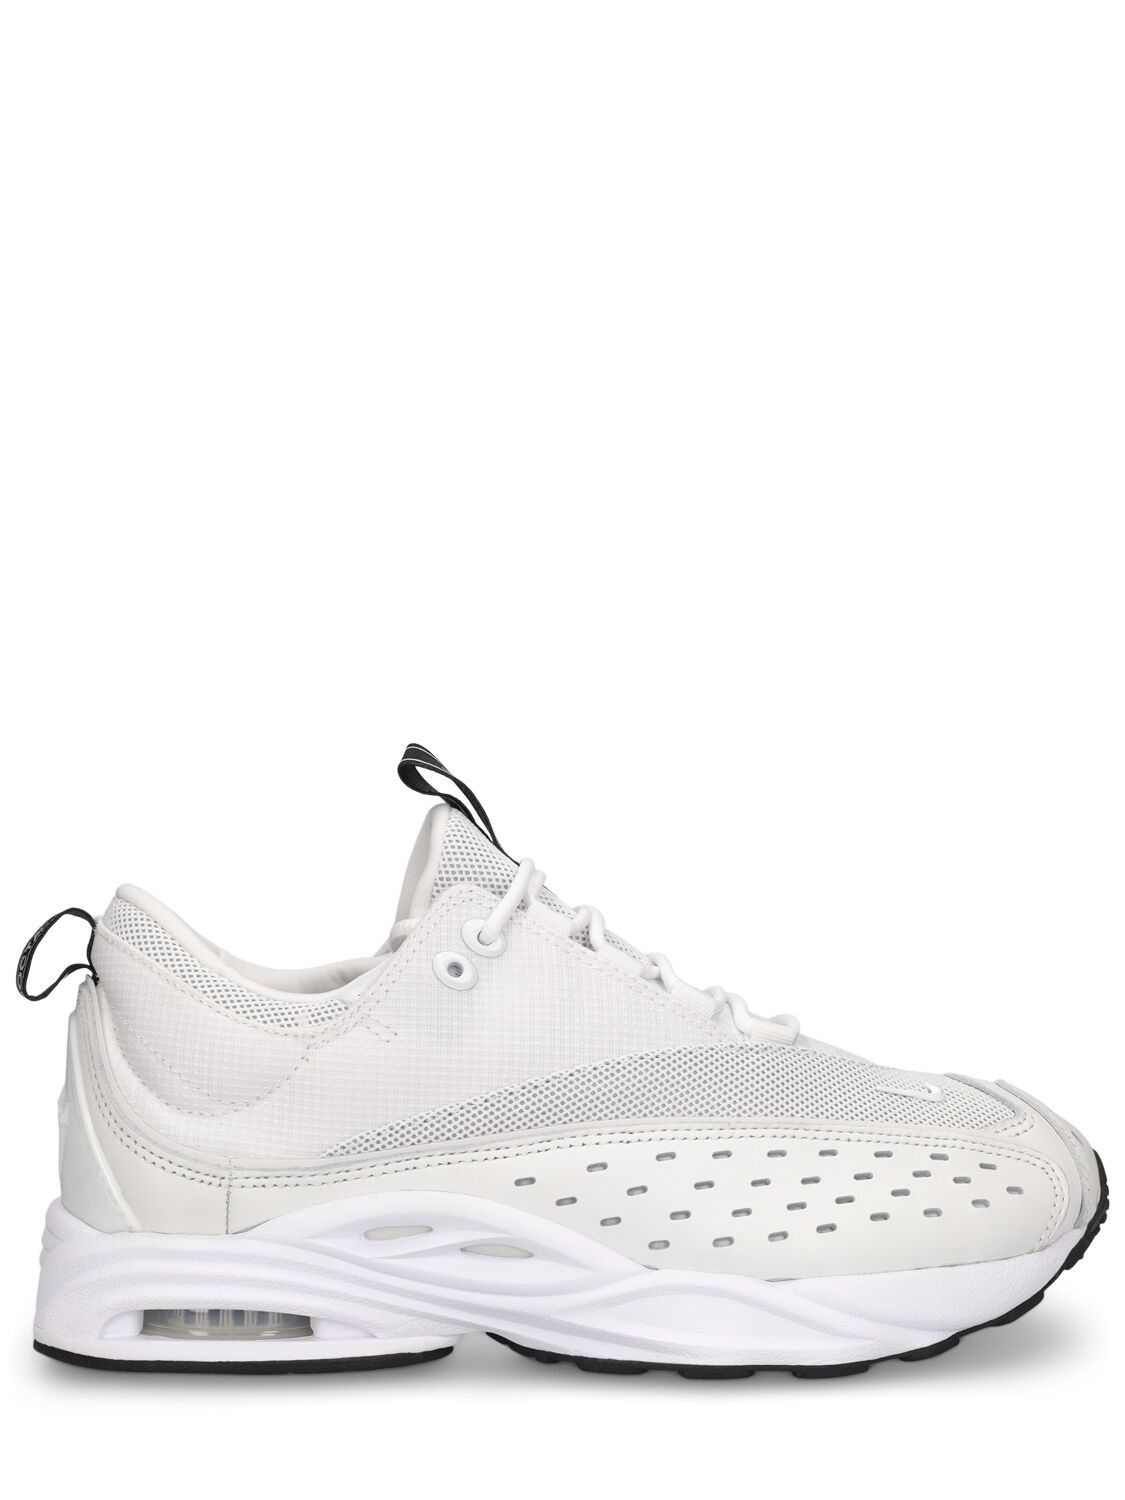 Image of Nocta Air Zoom Drive Sneakers